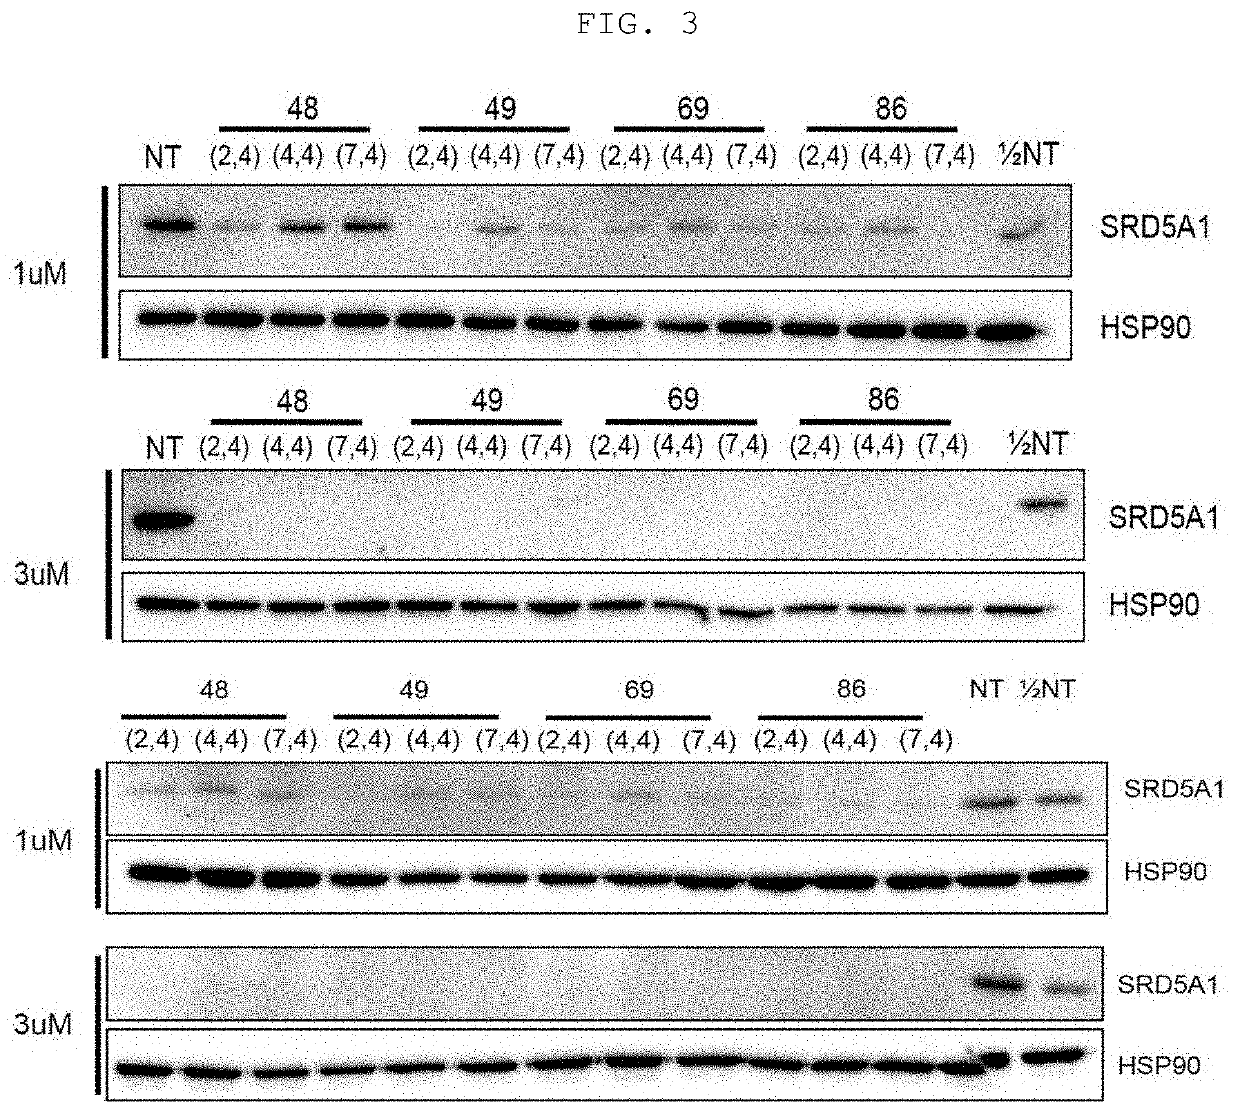 ASYMMETRIC siRNA FOR INHIBITING EXPRESSION OF MALE PATTERN HAIR LOSS TARGET GENE